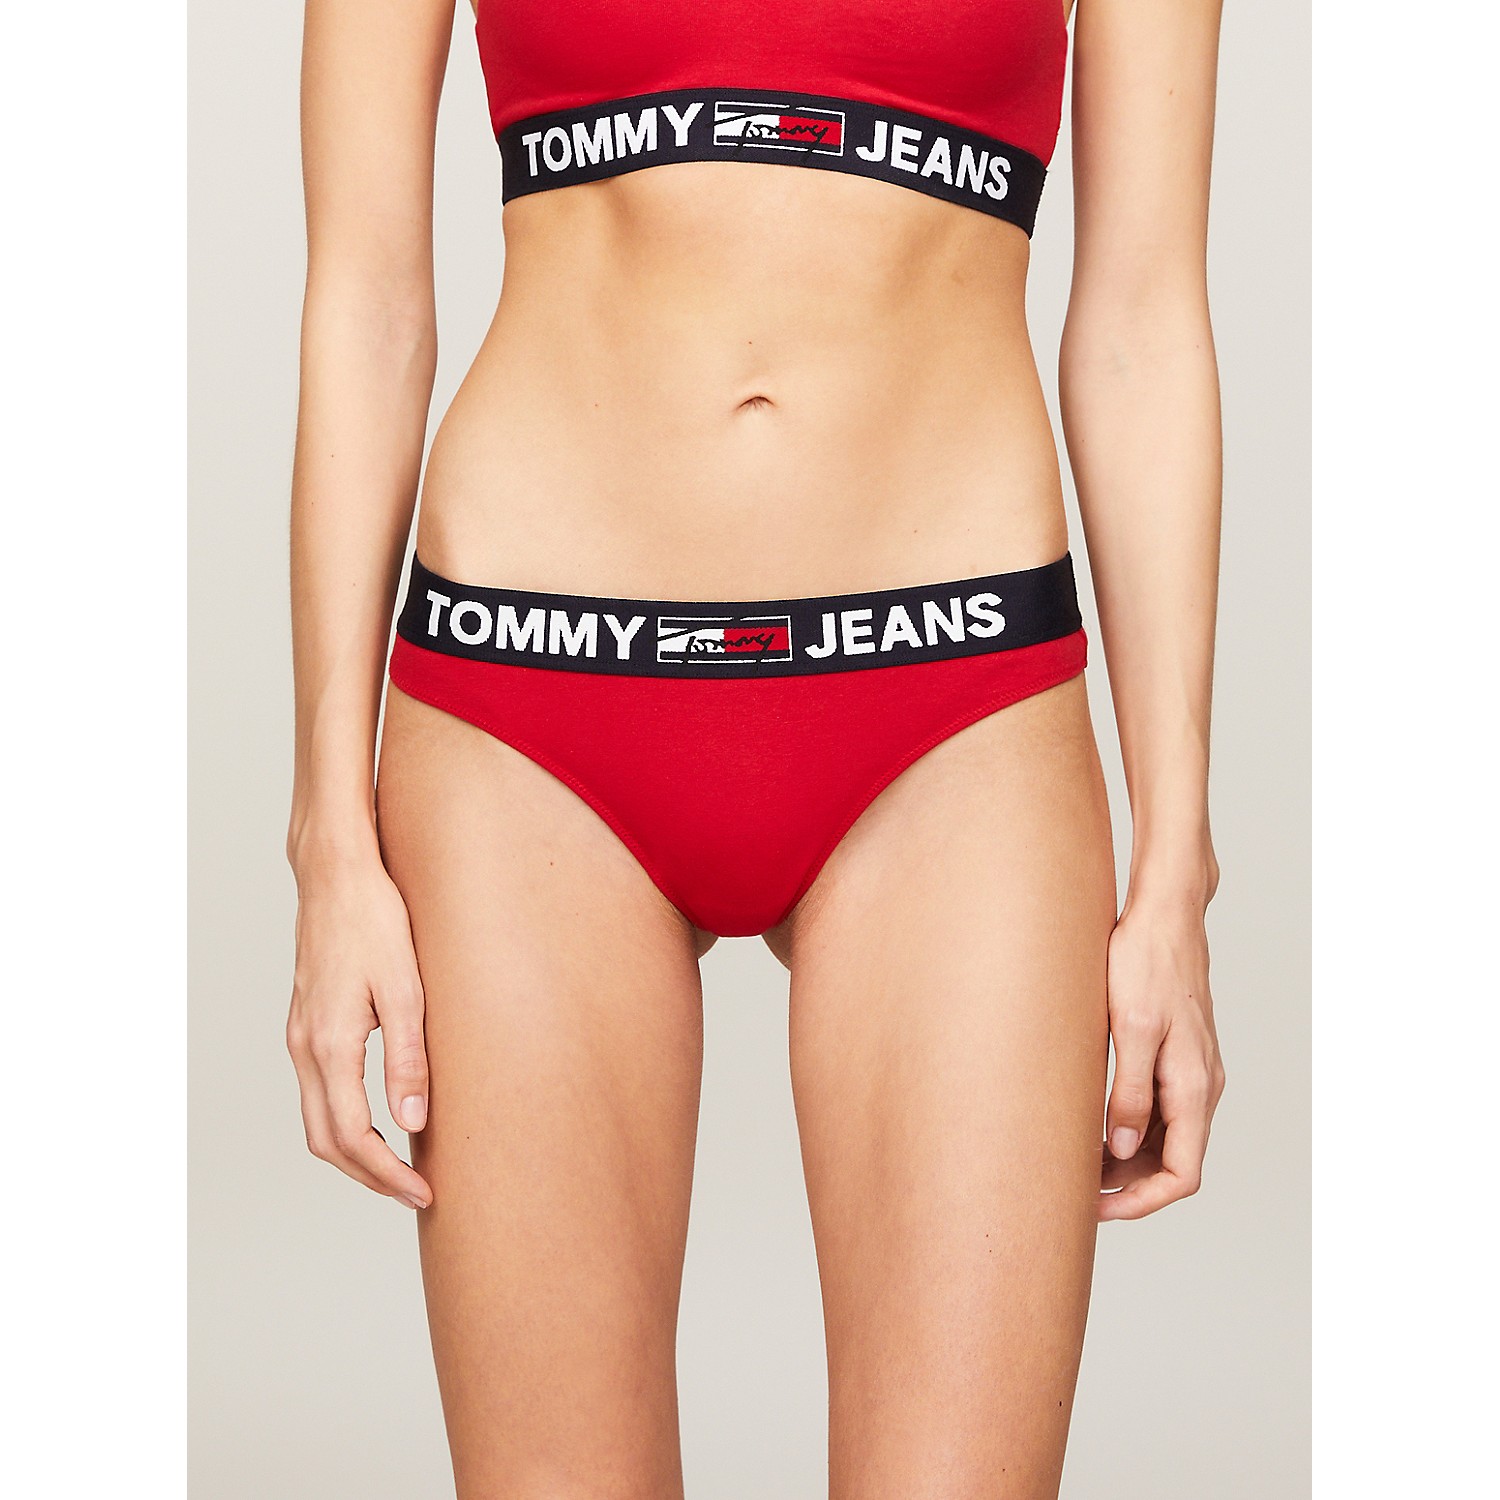 TOMMY JEANS Signature Logo Thong